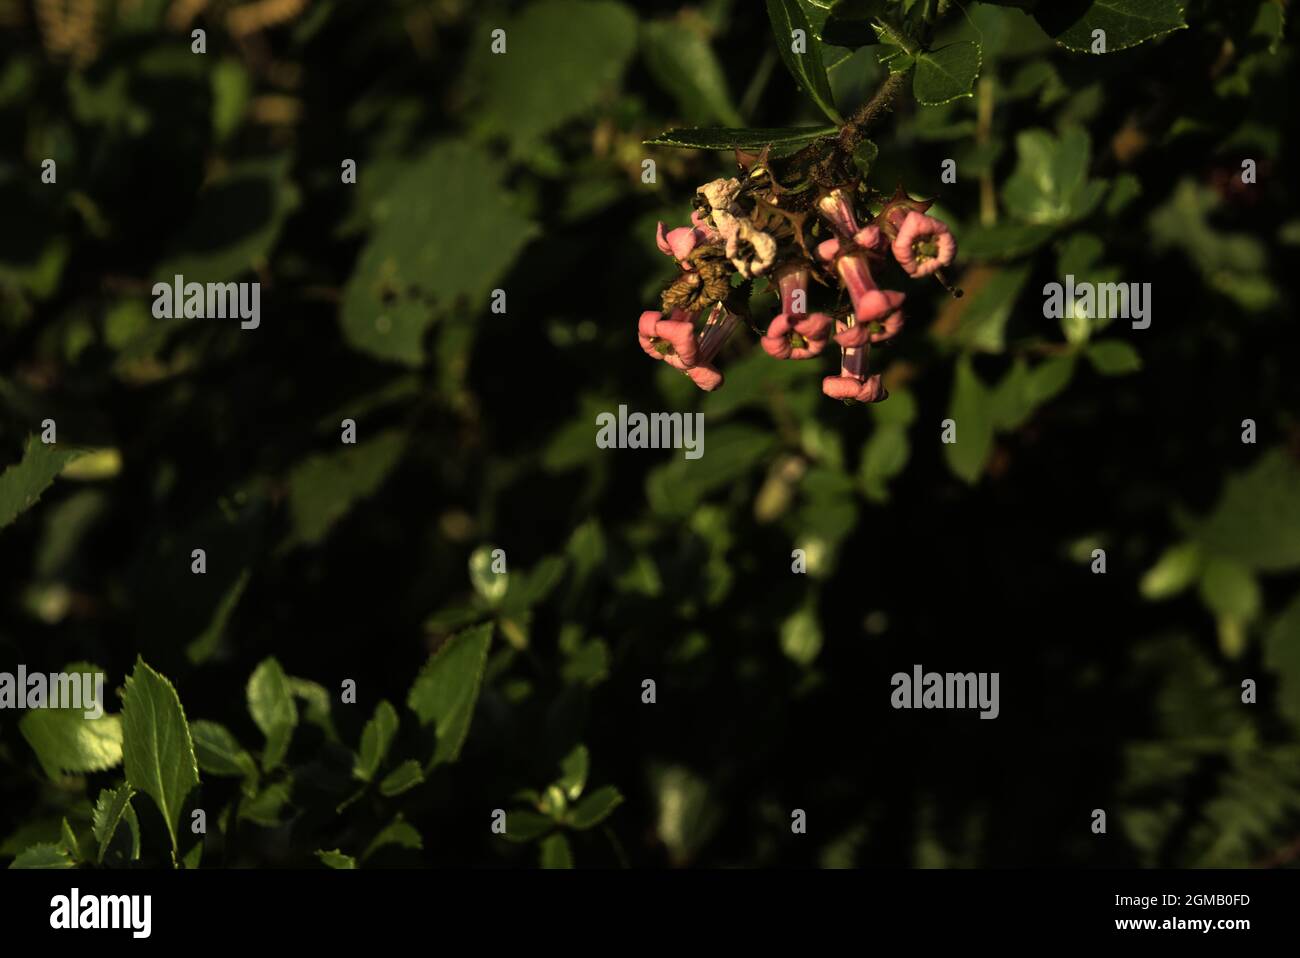 Closeup of Escallonia rubra flowers in a field under the sunlight with a blurry background Stock Photo